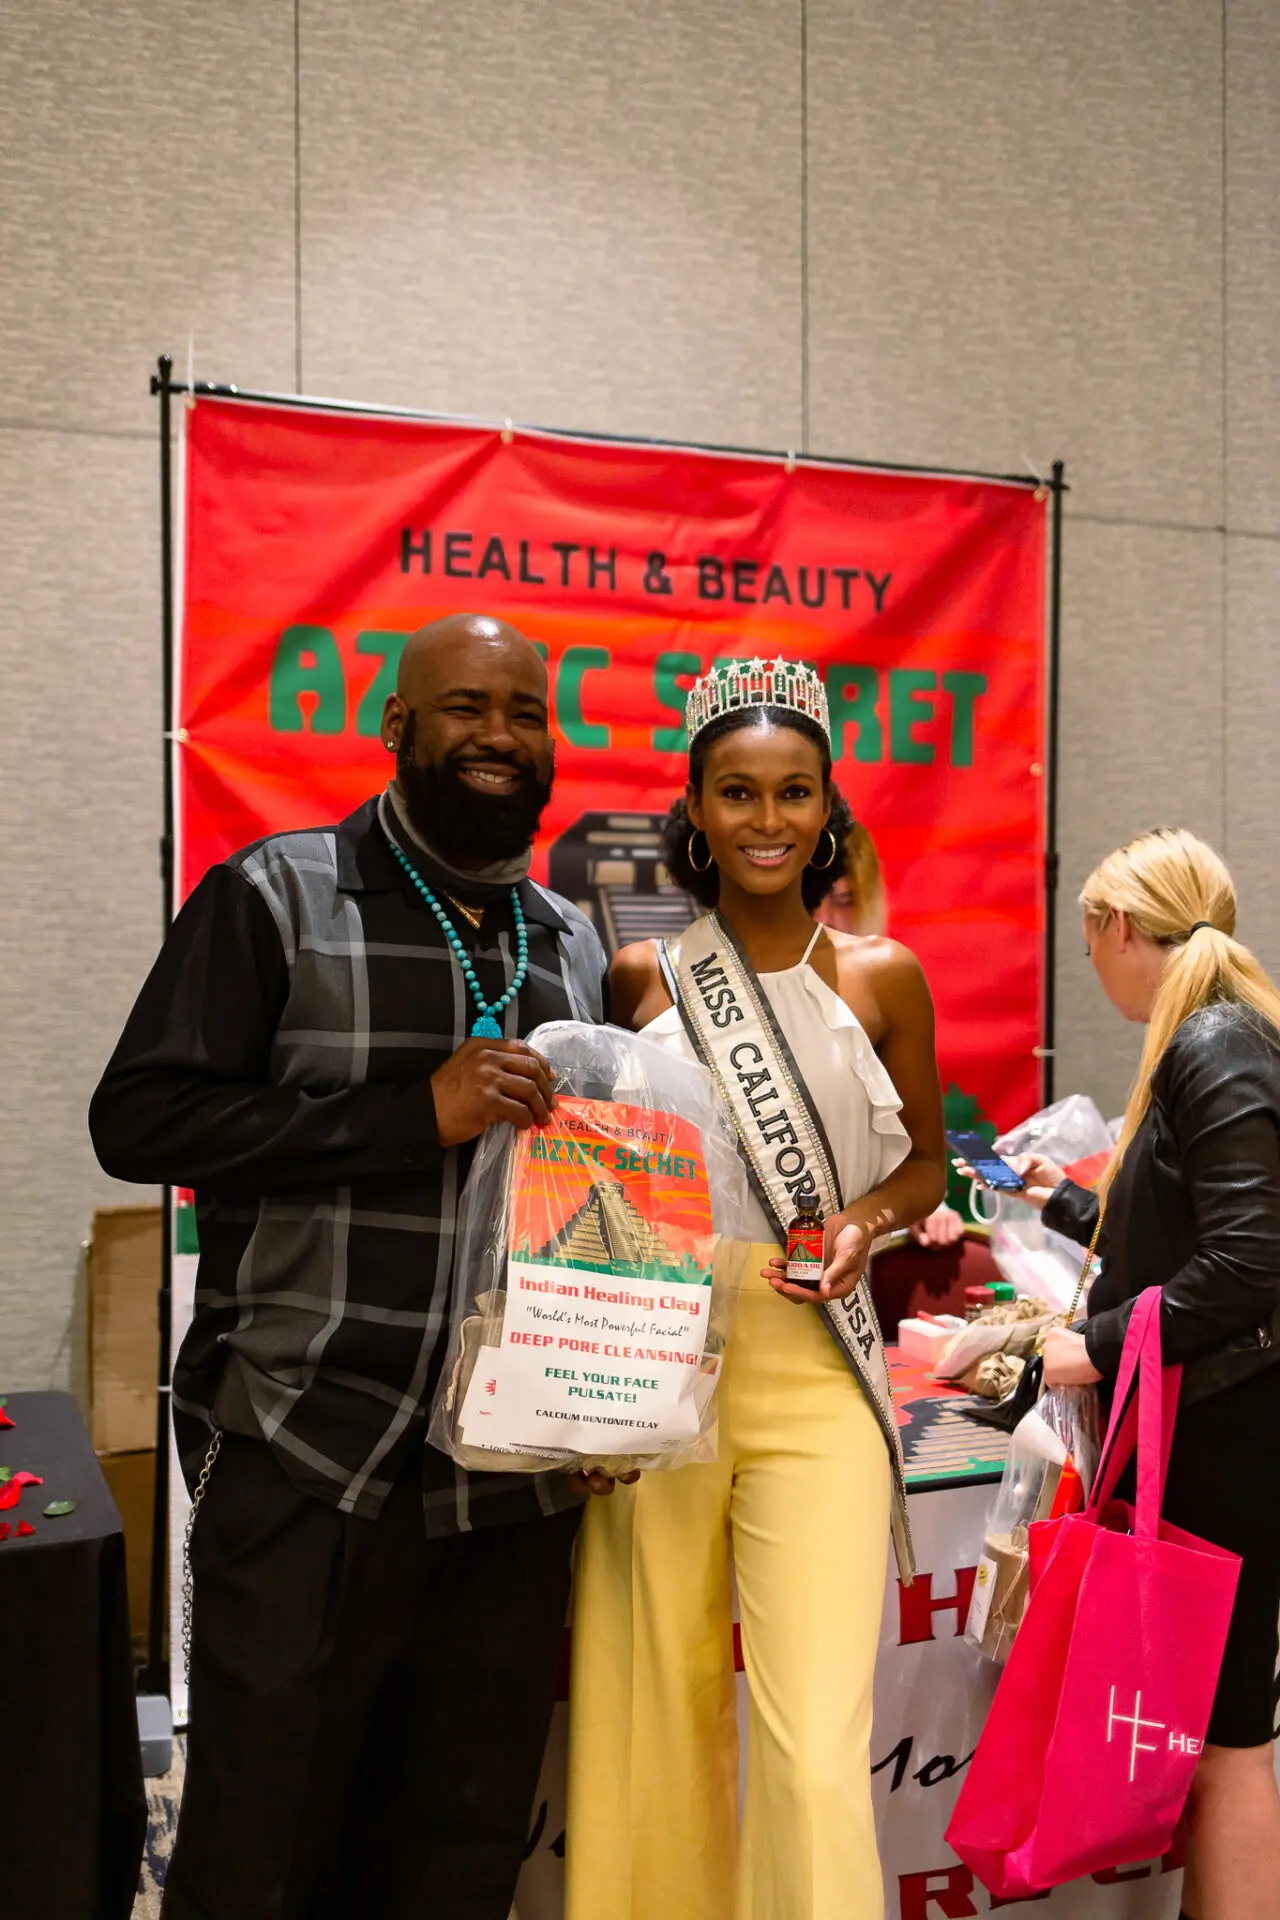 A man posing with Miss California